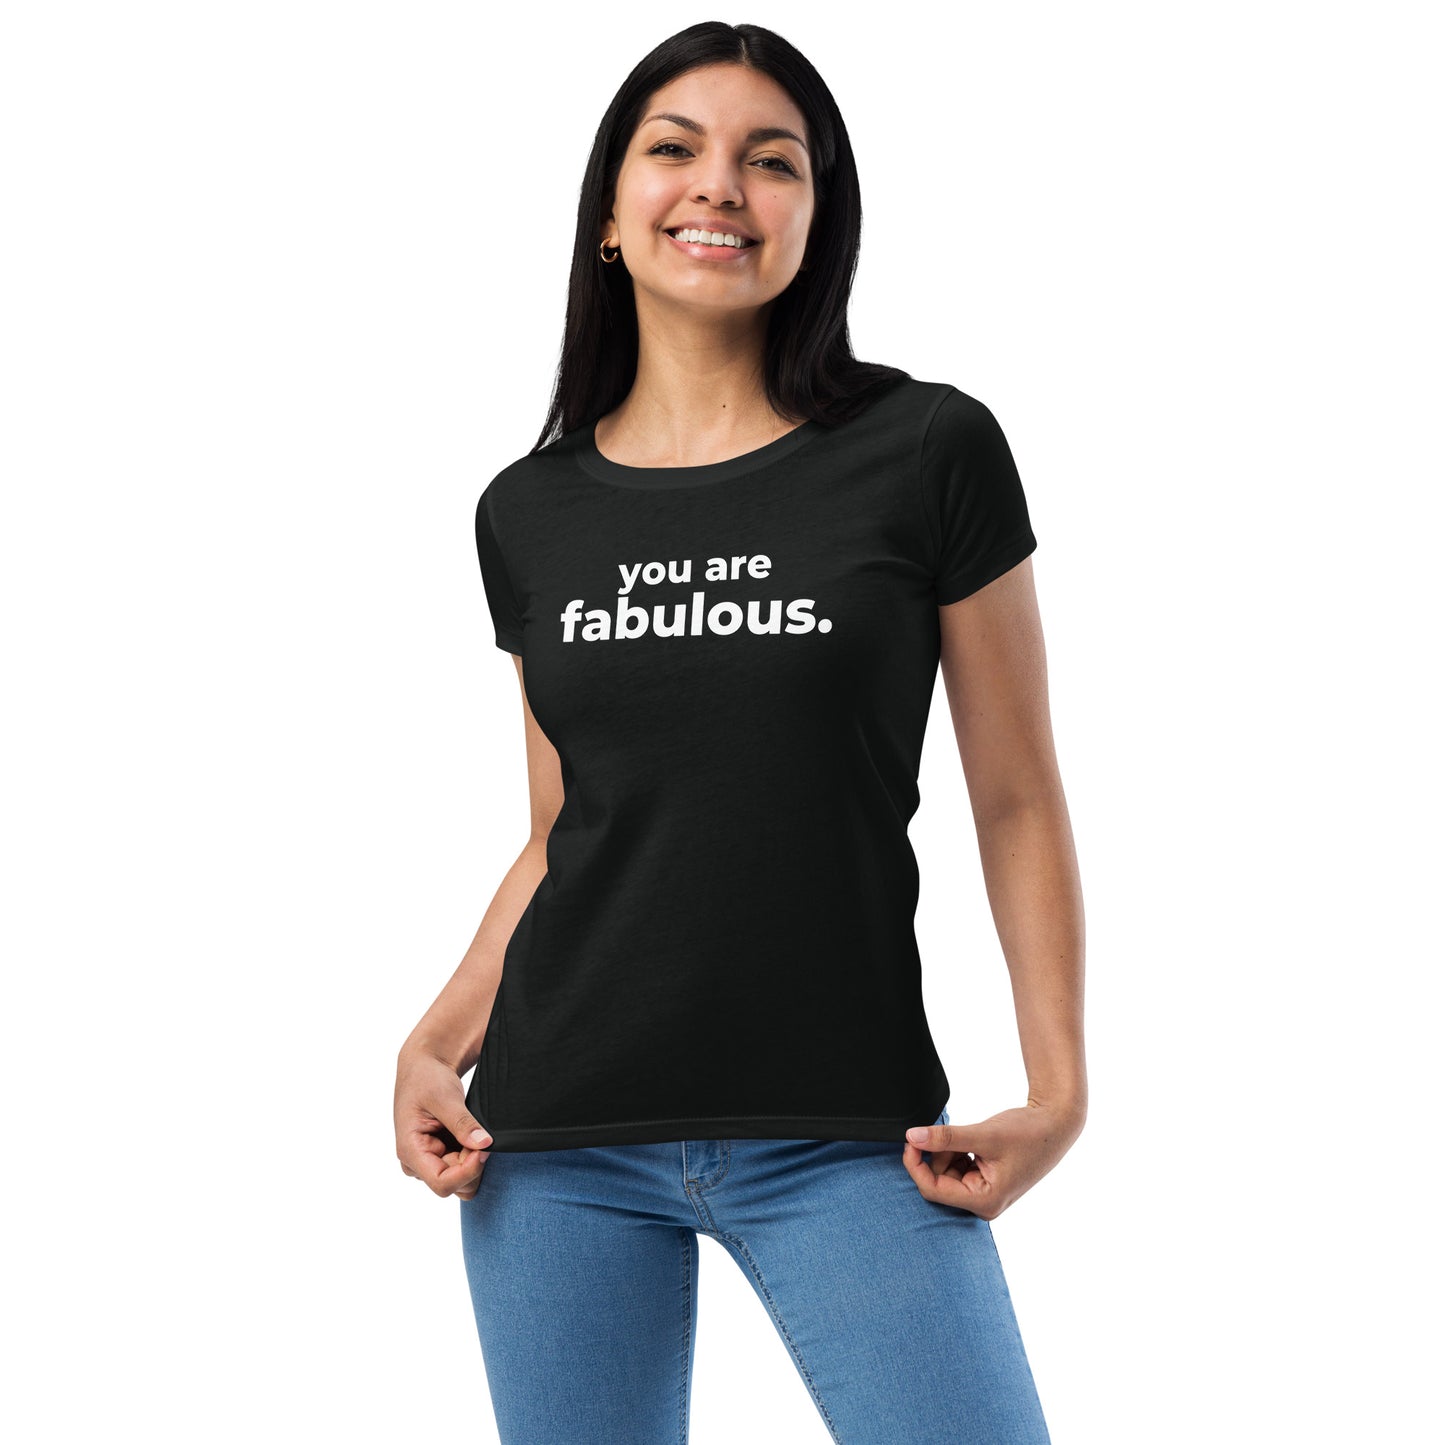 You are Fabulous - Women’s fitted t-shirt